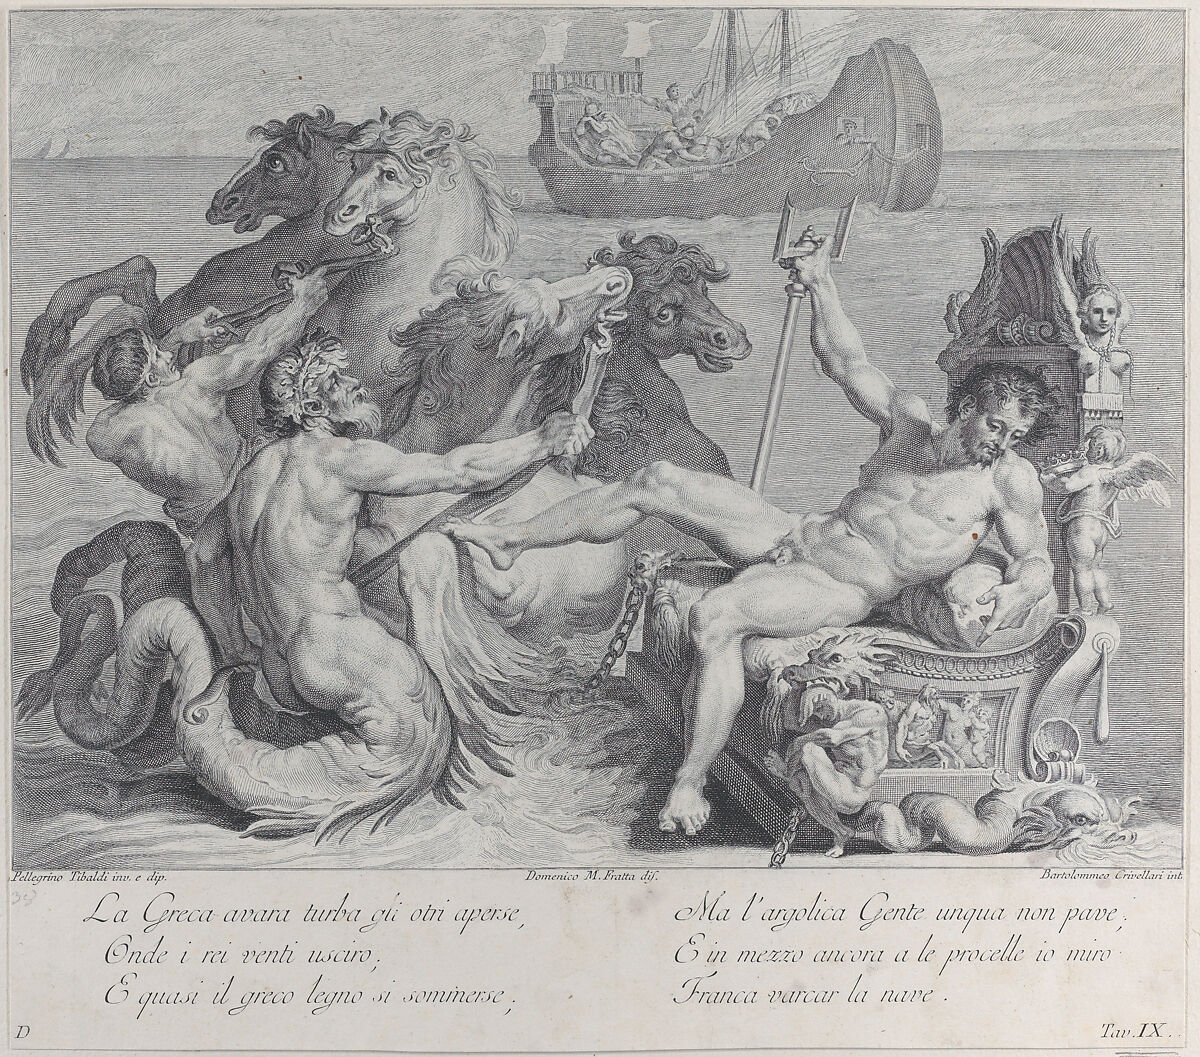 Plate 9: the Greeks opening the bag of wind, thinking there is gold inside, driving their vessel to the island of Circe, Bartolomeo Crivellari (Italian, active 18th century), Etching and engraving 